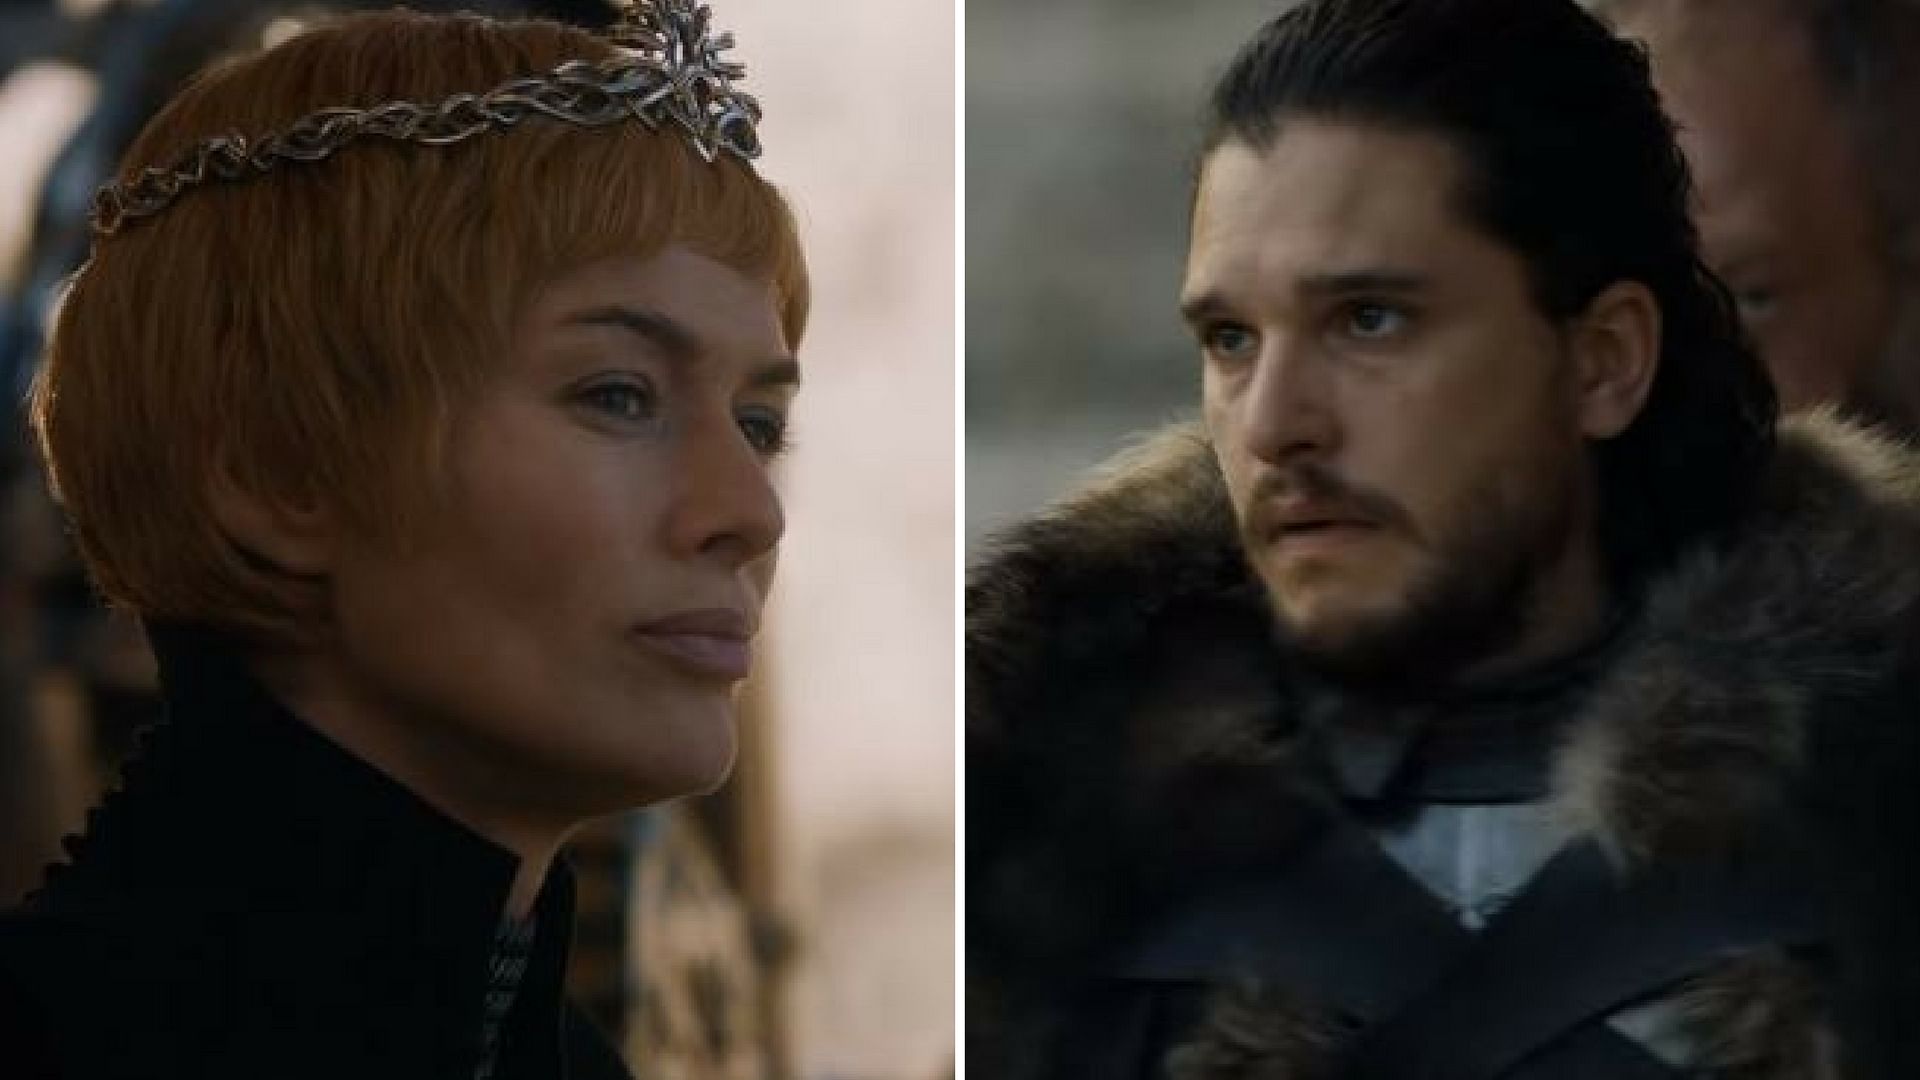 Jon Snow and Cersei Lanister stare each other down in the trailer of Season 7 finale.